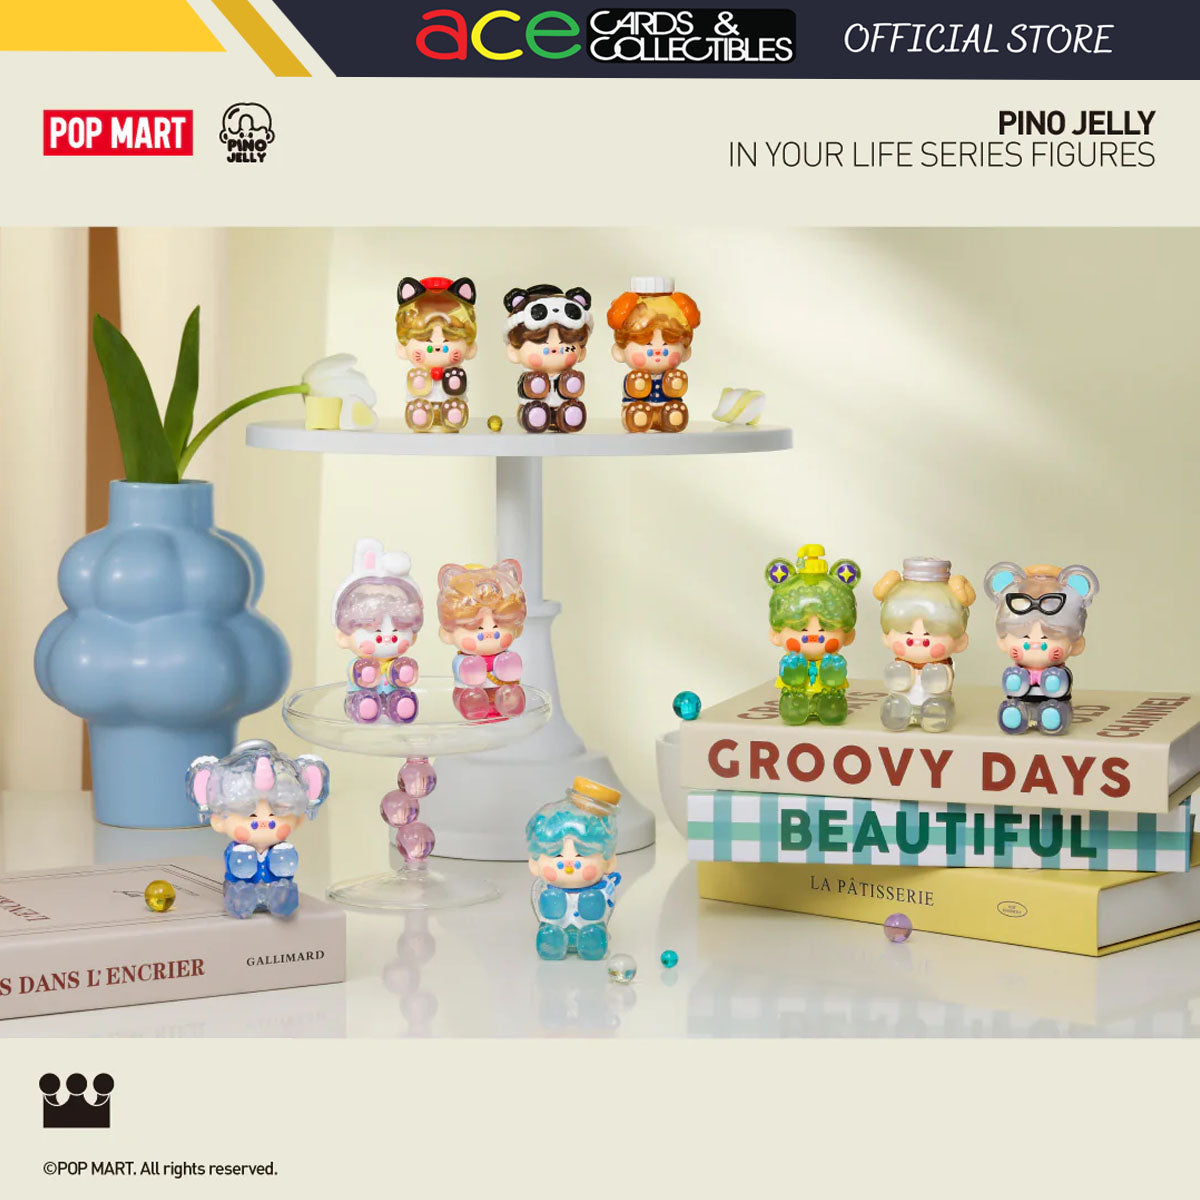 POP MART Pino Jelly In Your Life Series-Single Box (Random)-Pop Mart-Ace Cards & Collectibles